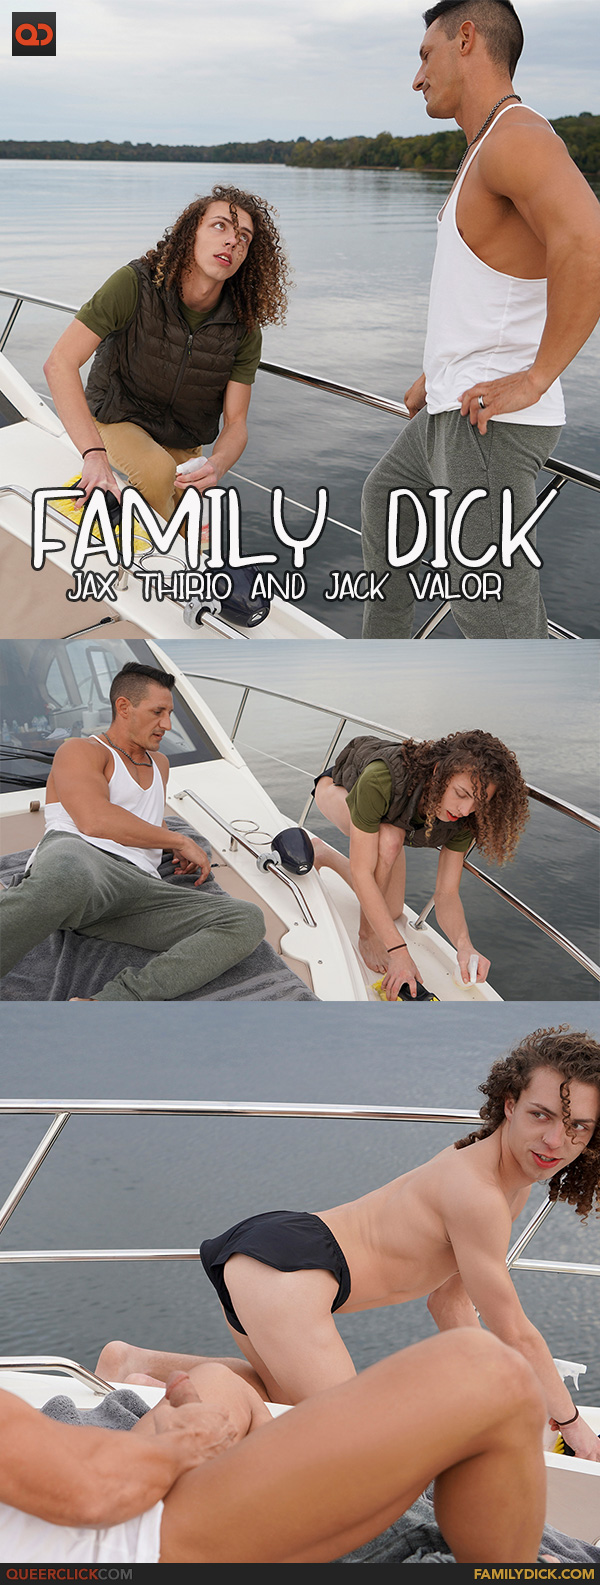 Say Uncle | Family Dick: Jax Thirio and Jack Valor